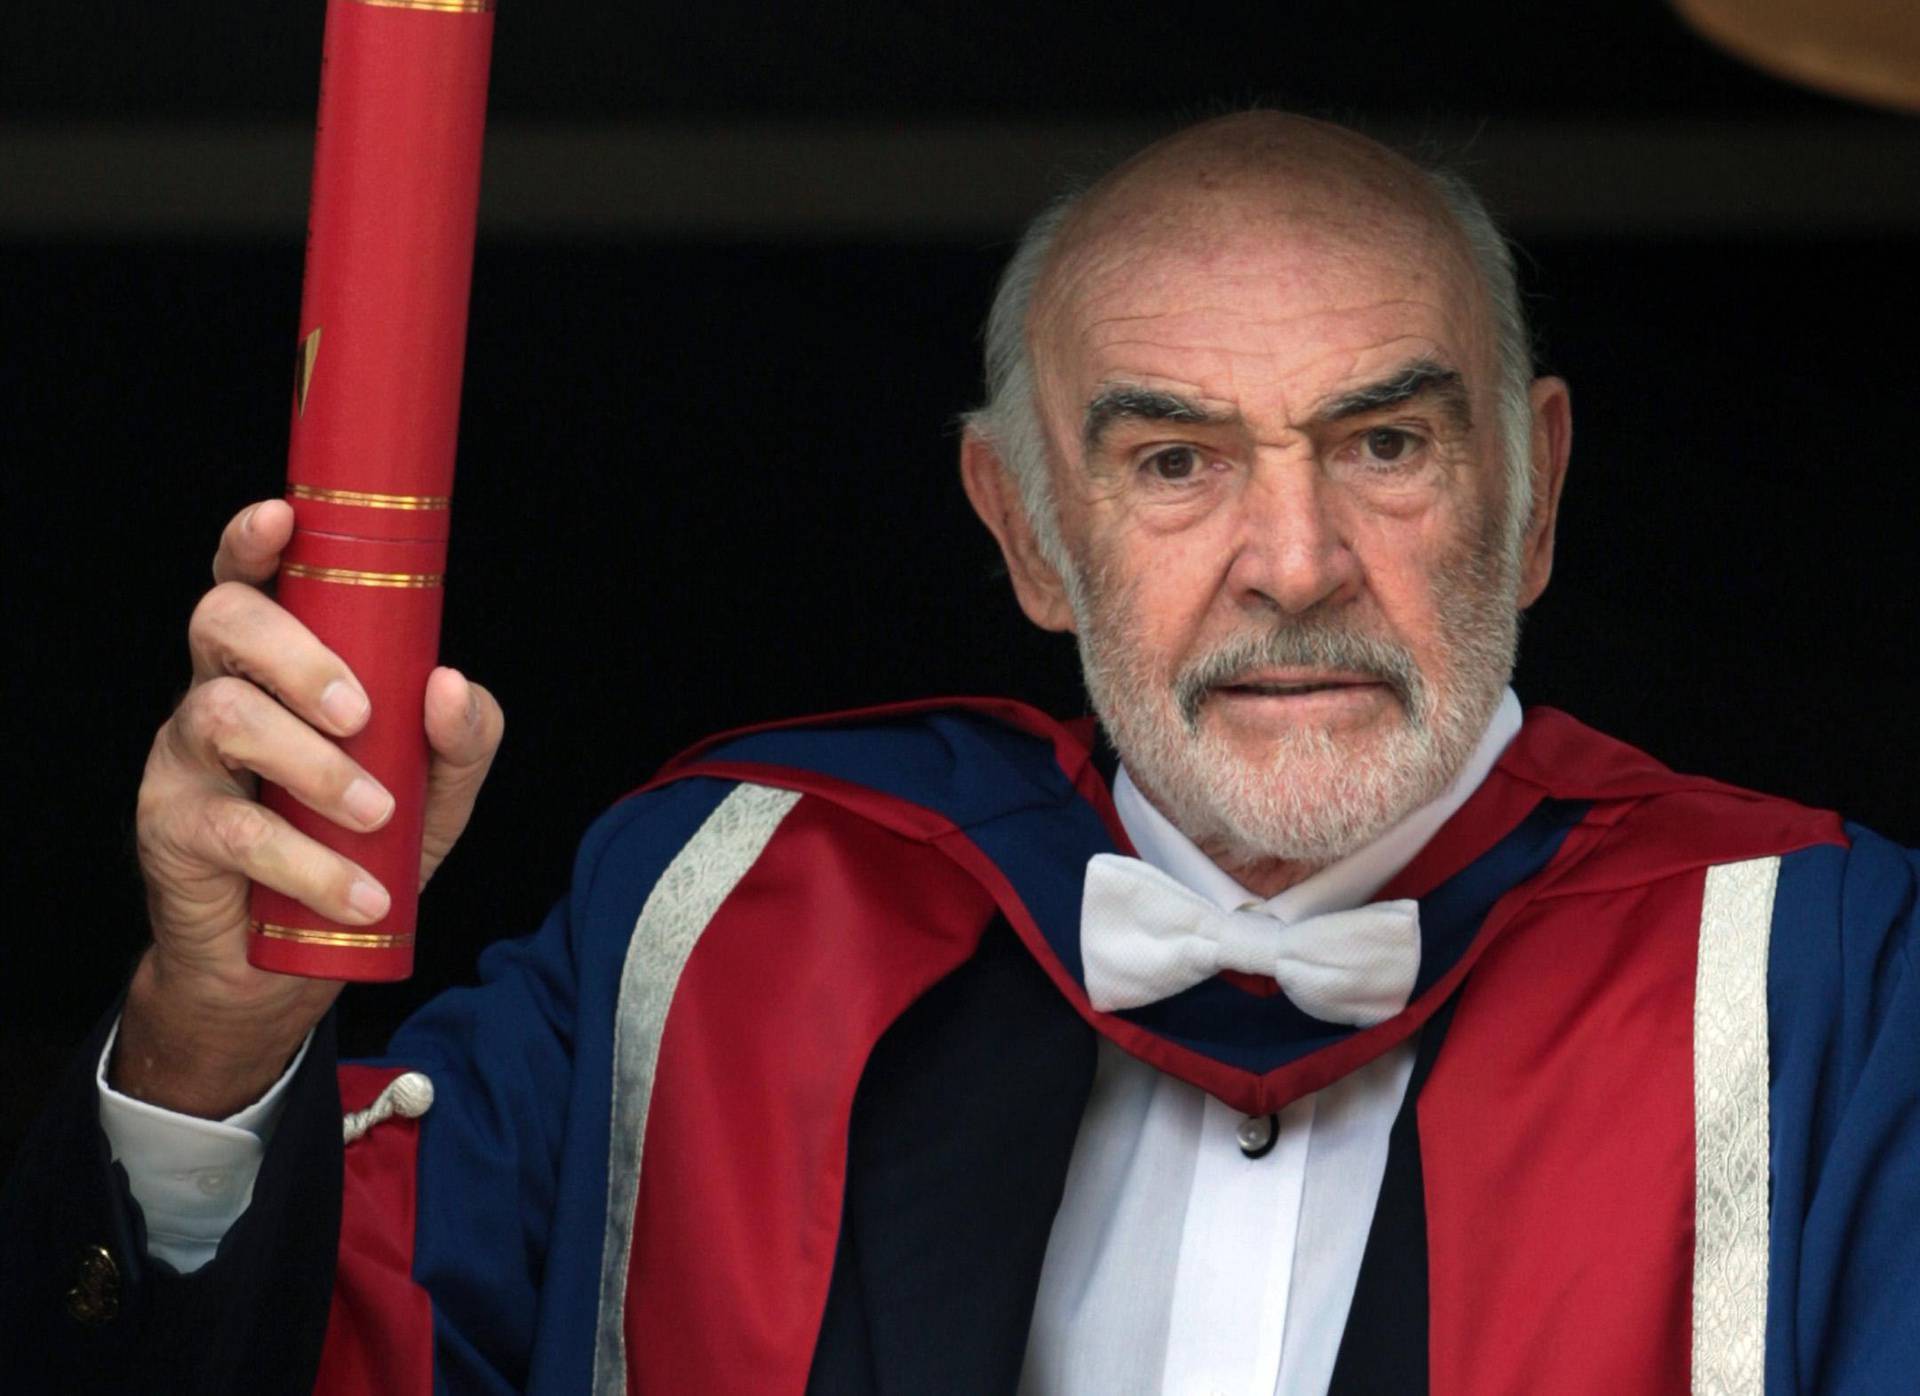 Sir Sean Connery collects honorary degree